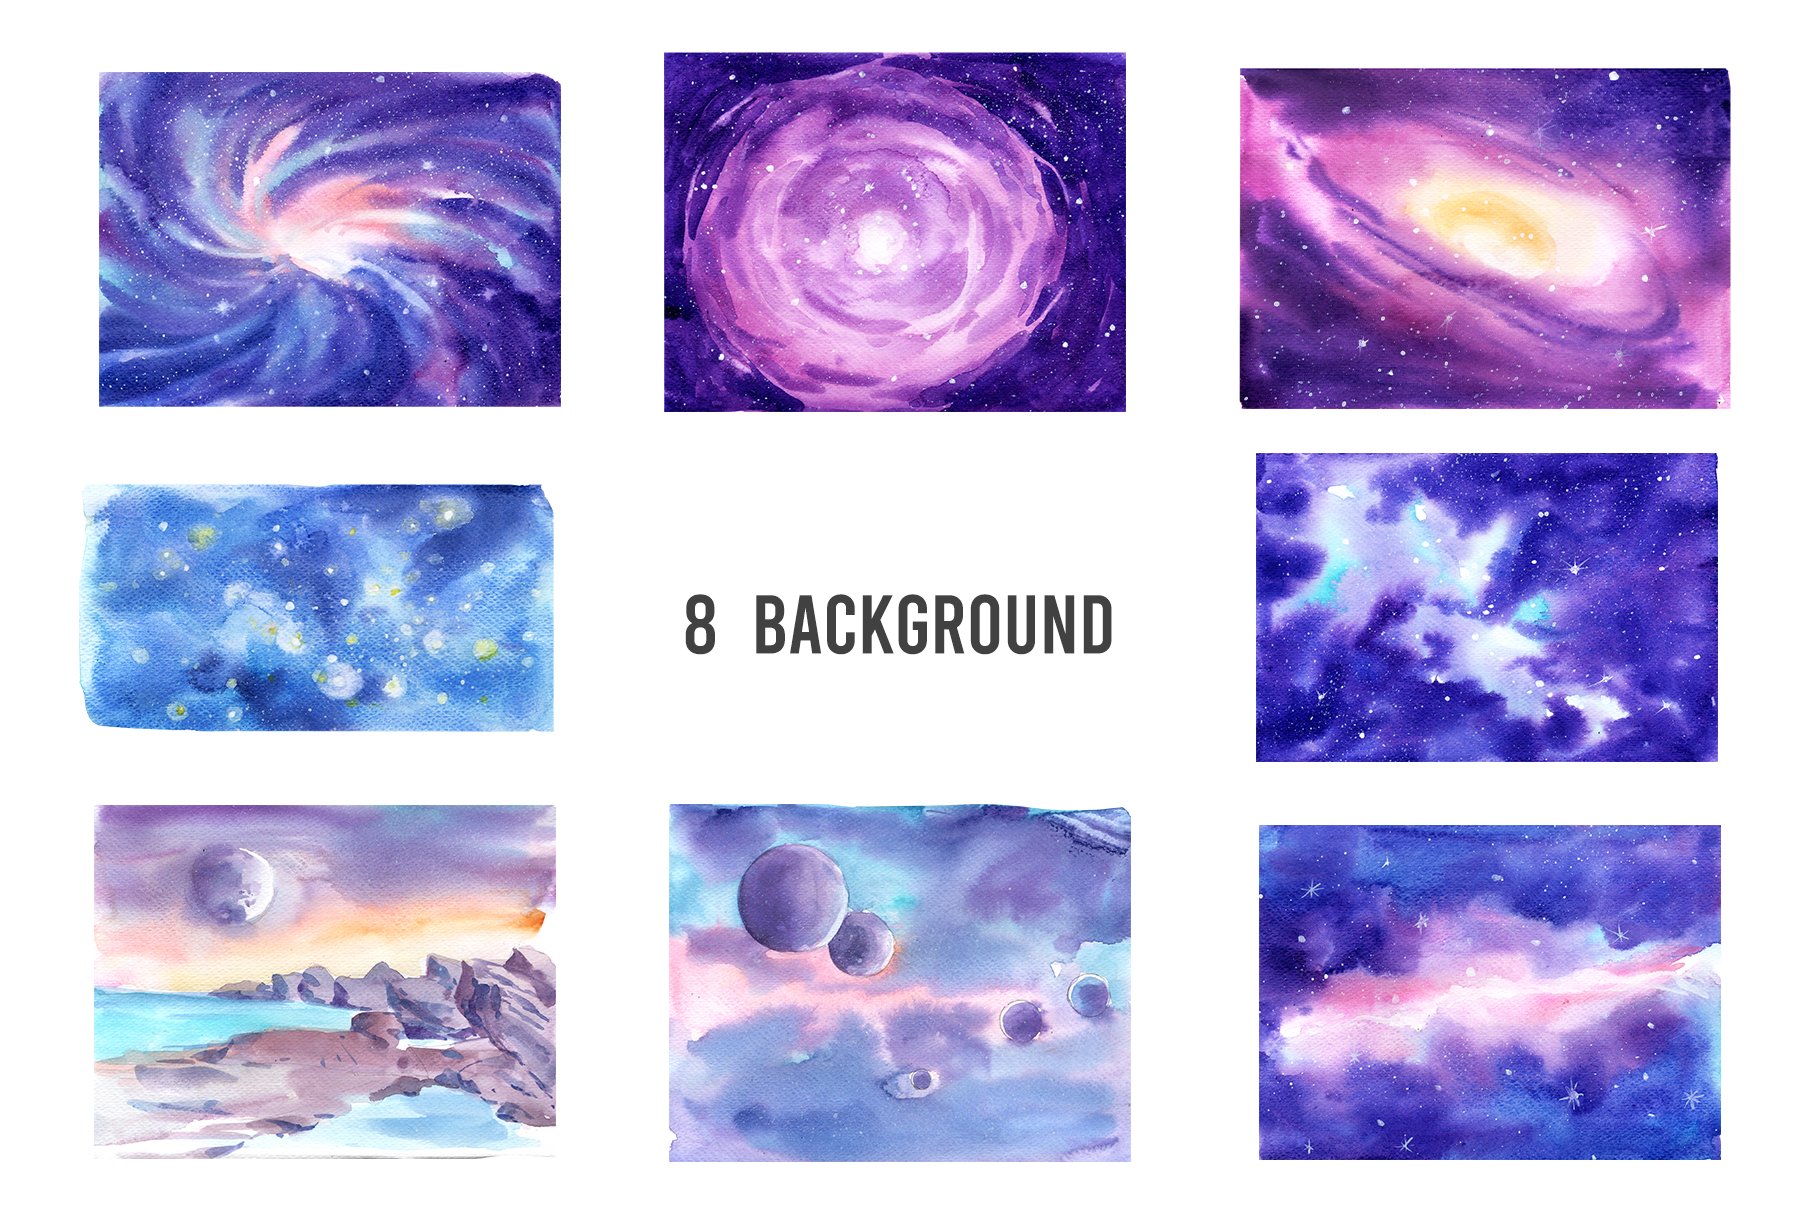 Creative galaxy backgrounds for you.